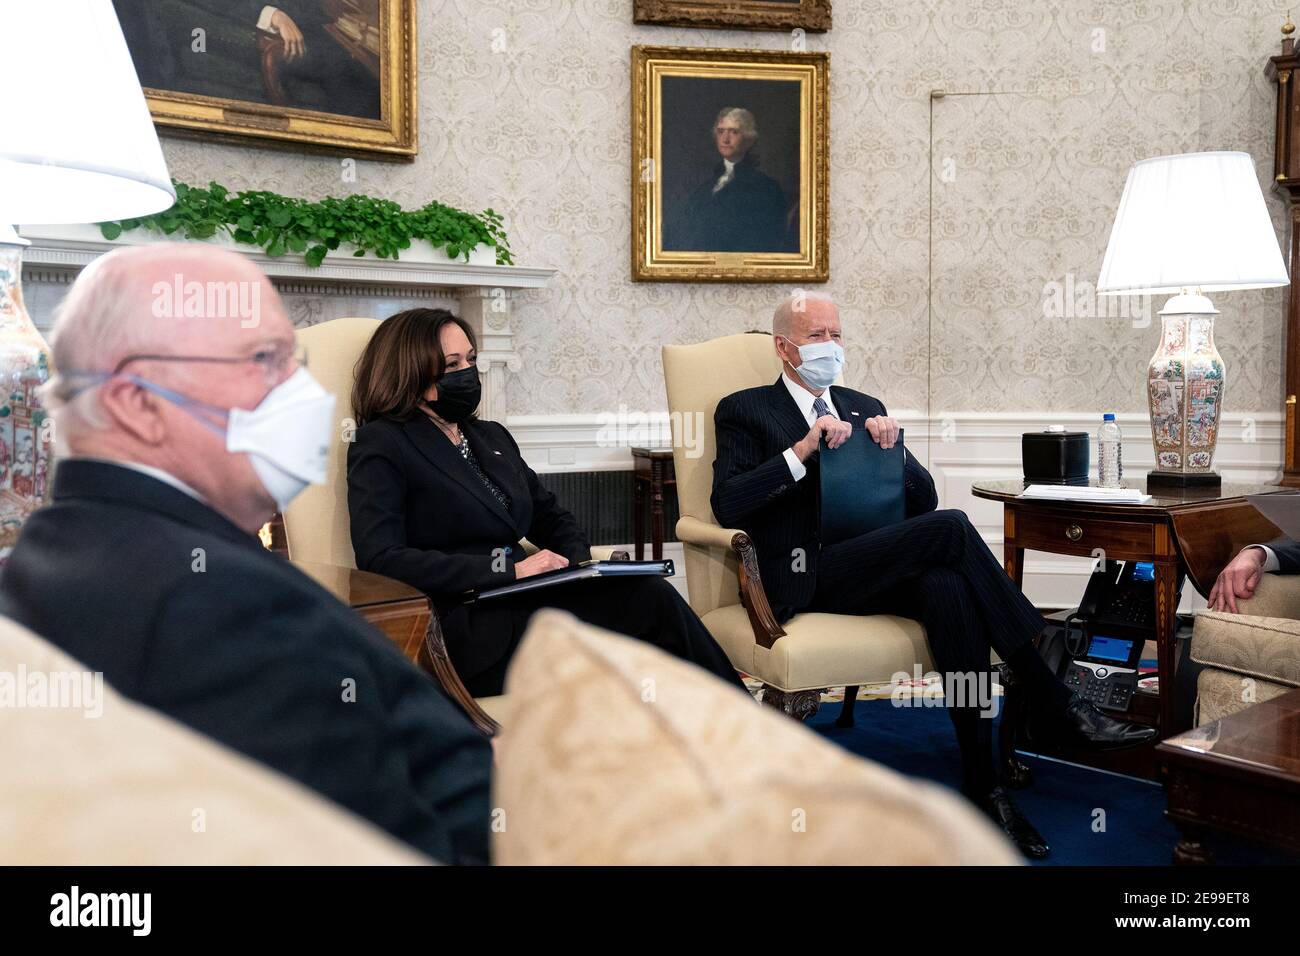 United States President Joe Biden, right, wears a protective mask while meeting with U.S. Vice President Kamala Harris, center, and Democratic Senators to discuss the American Rescue Plan in the Oval Office of the White House in Washington on Wednesday, February 3, 2021. Credit: Stefani Reynolds/Pool via CNP /MediaPunch Stock Photo